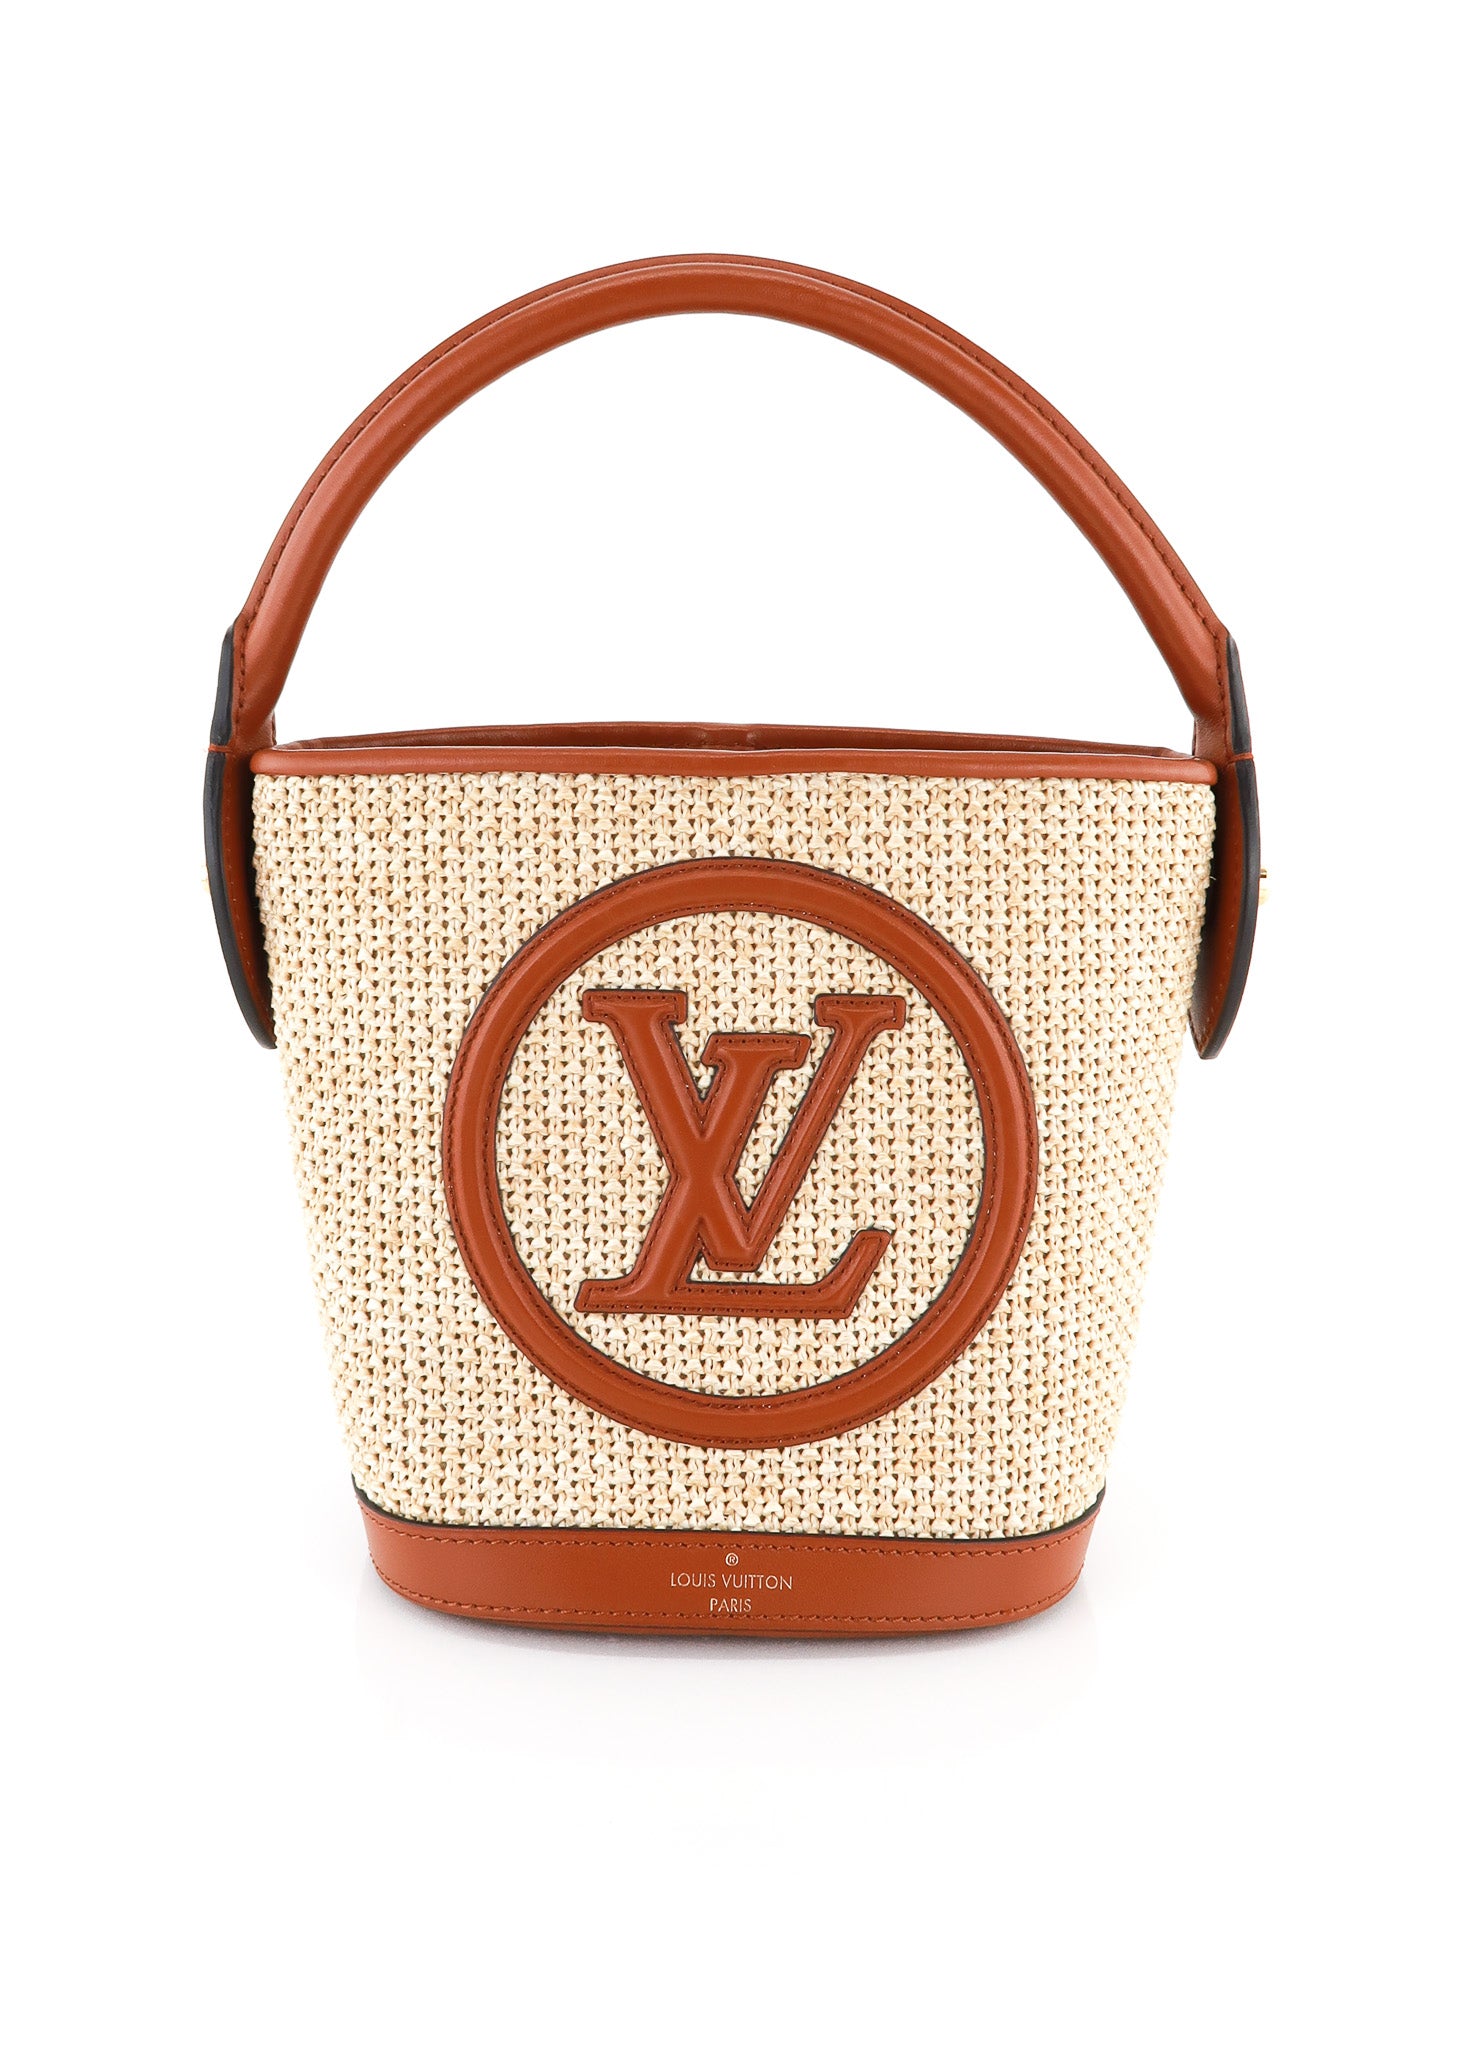 LOUIS VUITTON CANNES BAG ROSE POP Giant Monogram, Limited Ed by